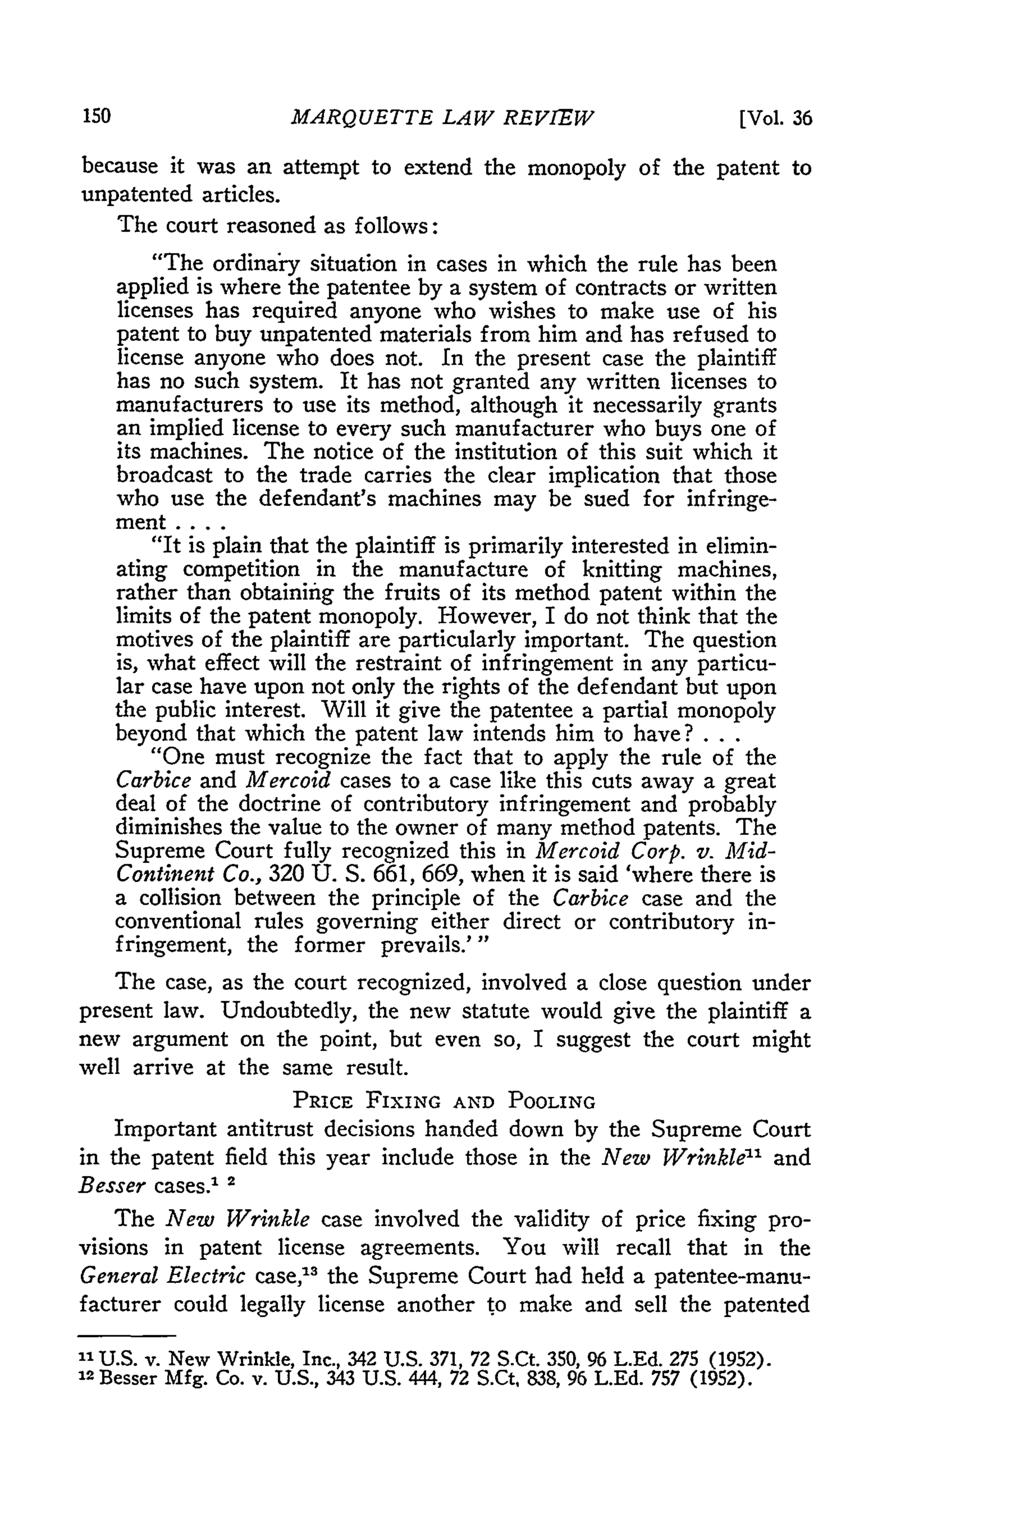 MARQUETTE LAW REVIEW [Vol. 36 because it was an attempt to extend the monopoly of the patent to unpatented articles.